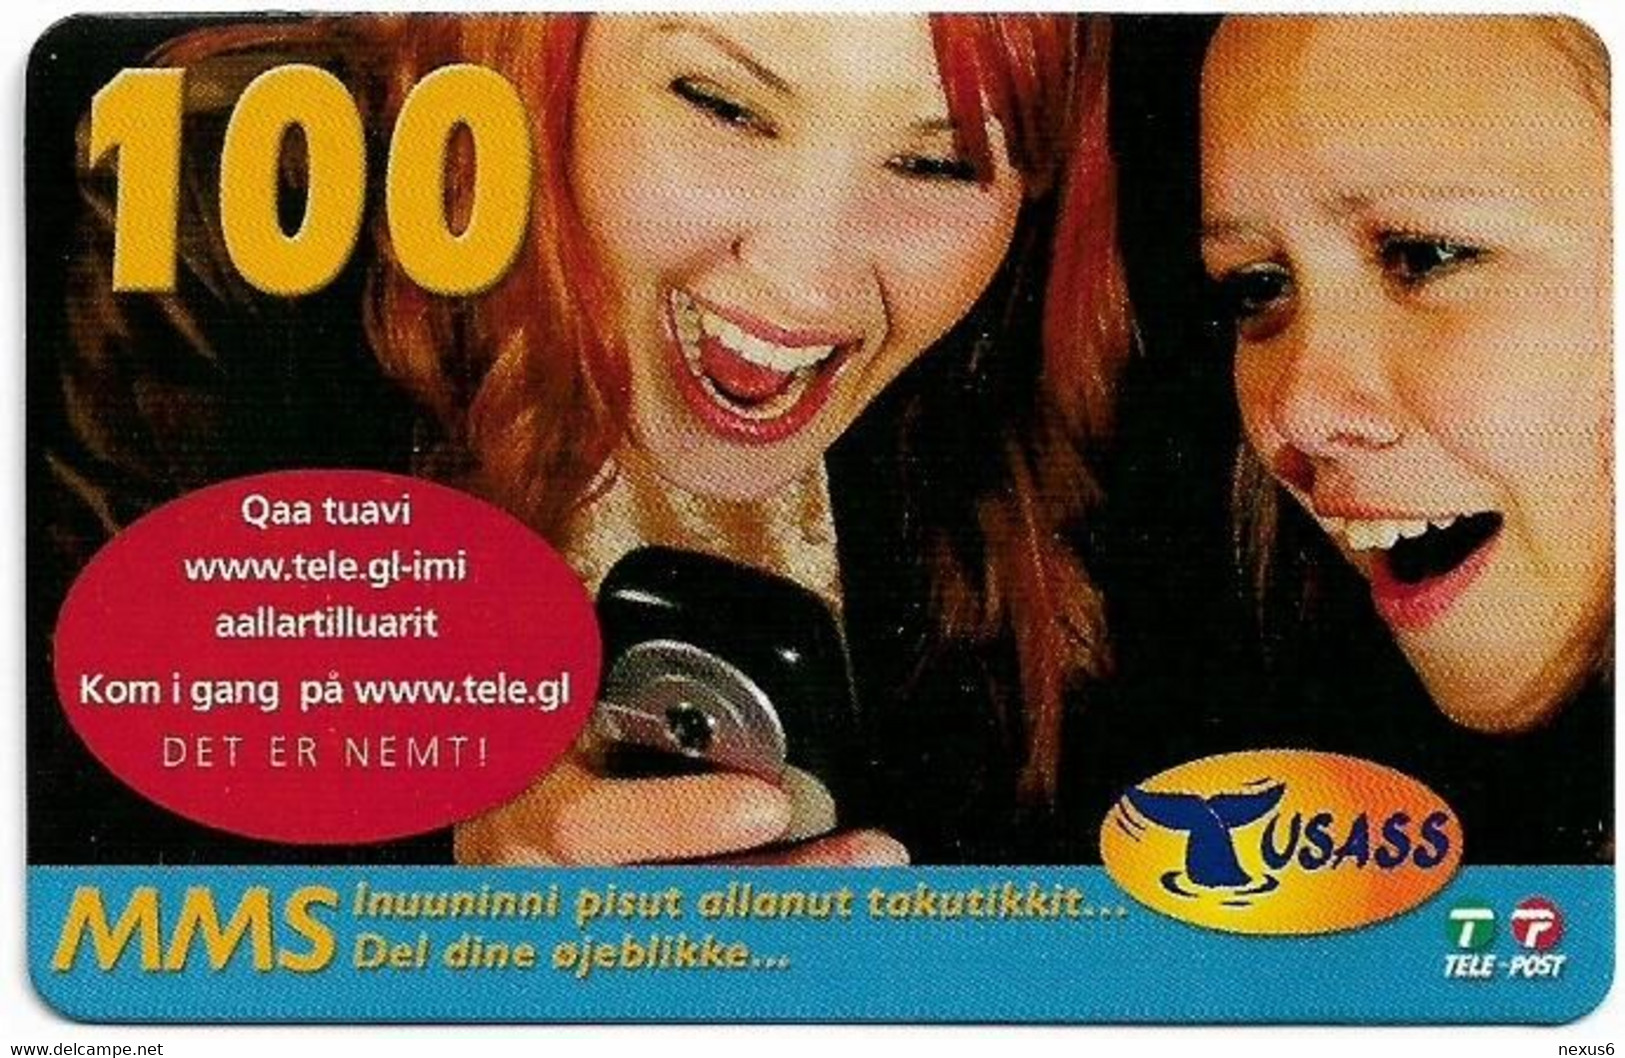 Greenland - Tusass - 2 Girls With Mobile, GSM Refill, 100kr. Exp. 17.05.2009, Used - Groenland